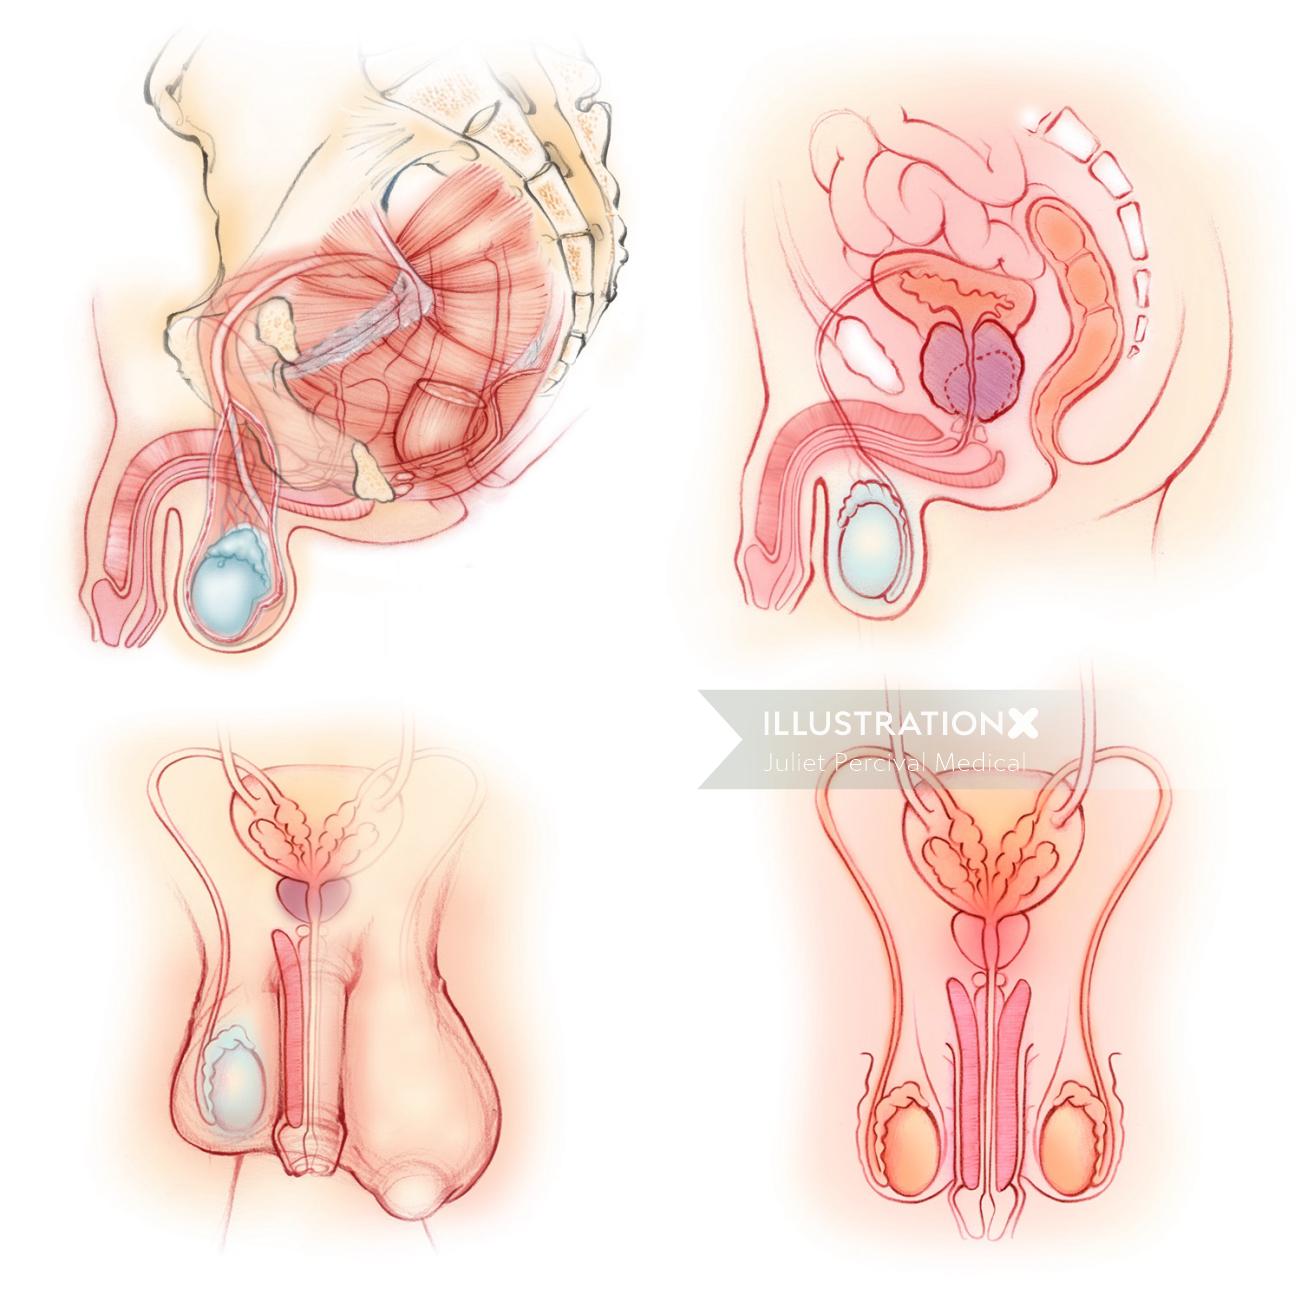 Male Pelvic Floor Muscles and Reproductive Organs | Illustration by Juliet  Percival Medical